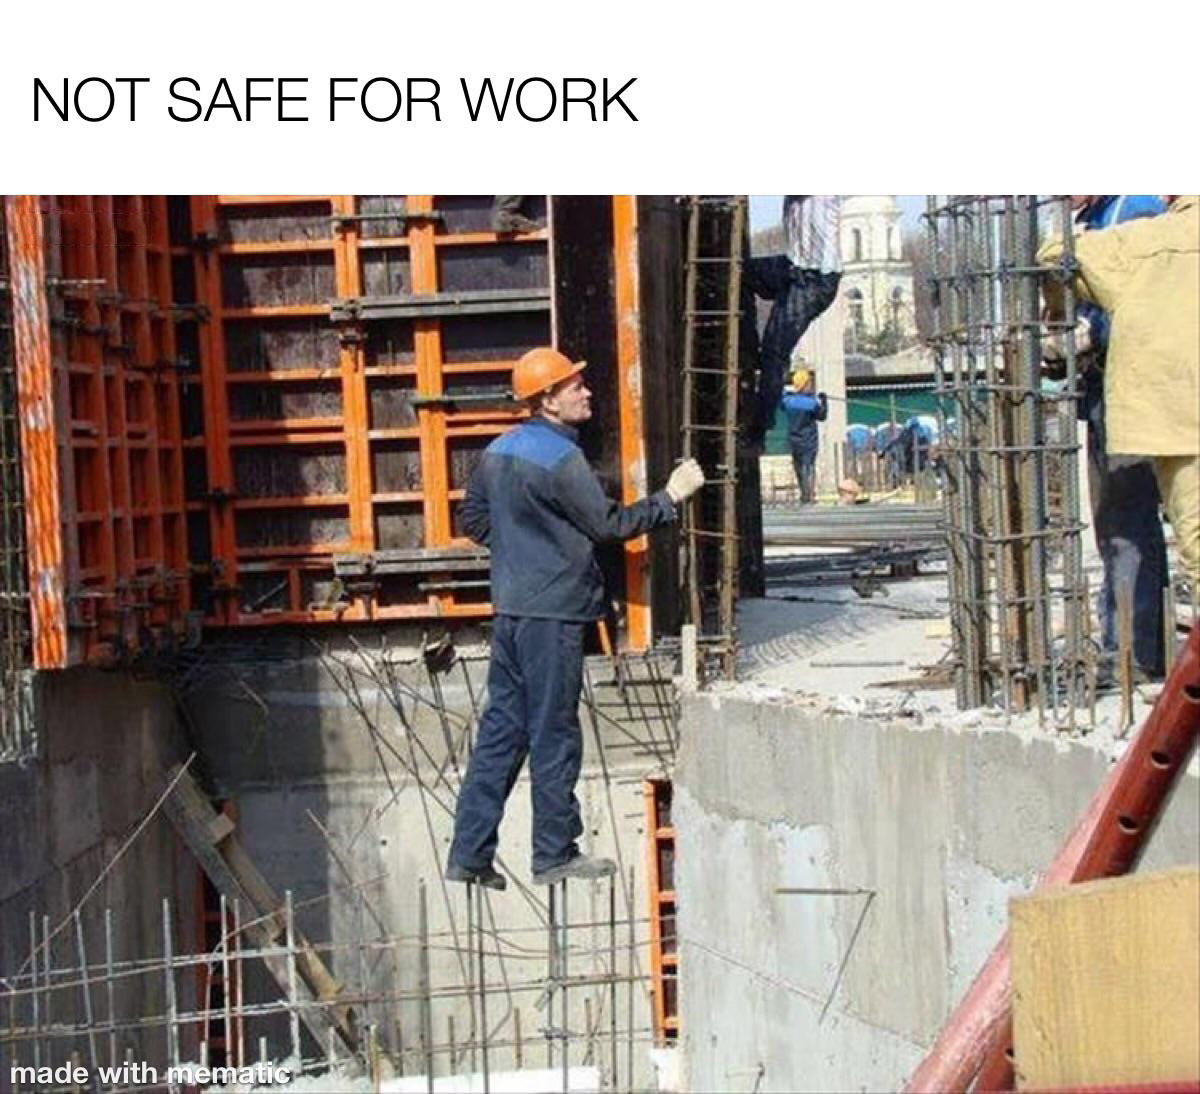 dank memes - Not Safe For Work made with mematic